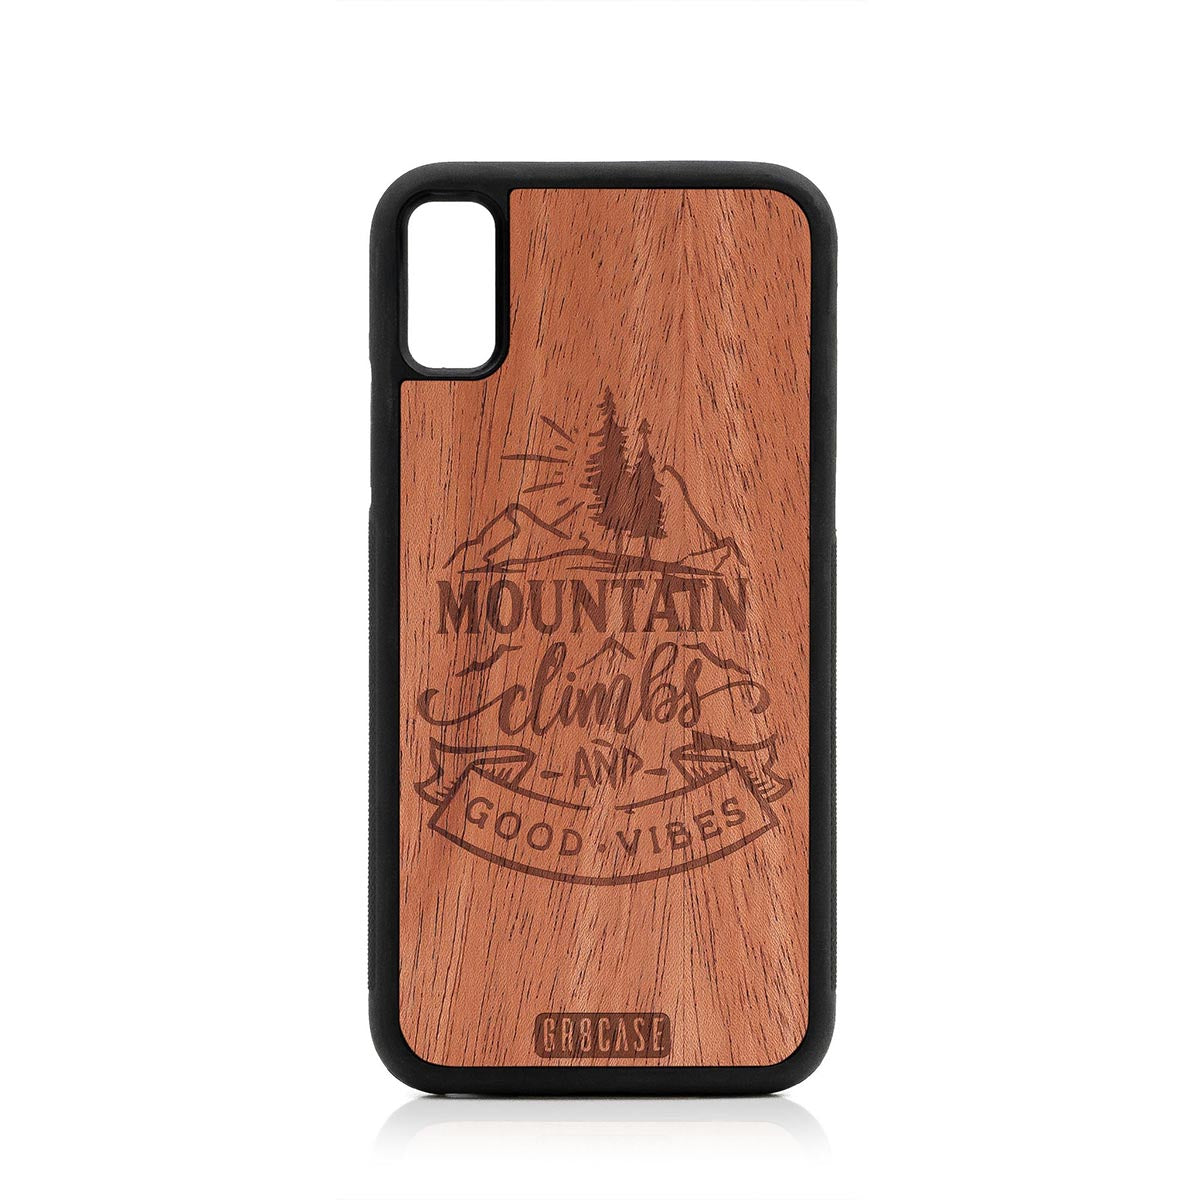 Mountain Climbs And Good Vibes Design Wood Case For iPhone XR by GR8CASE